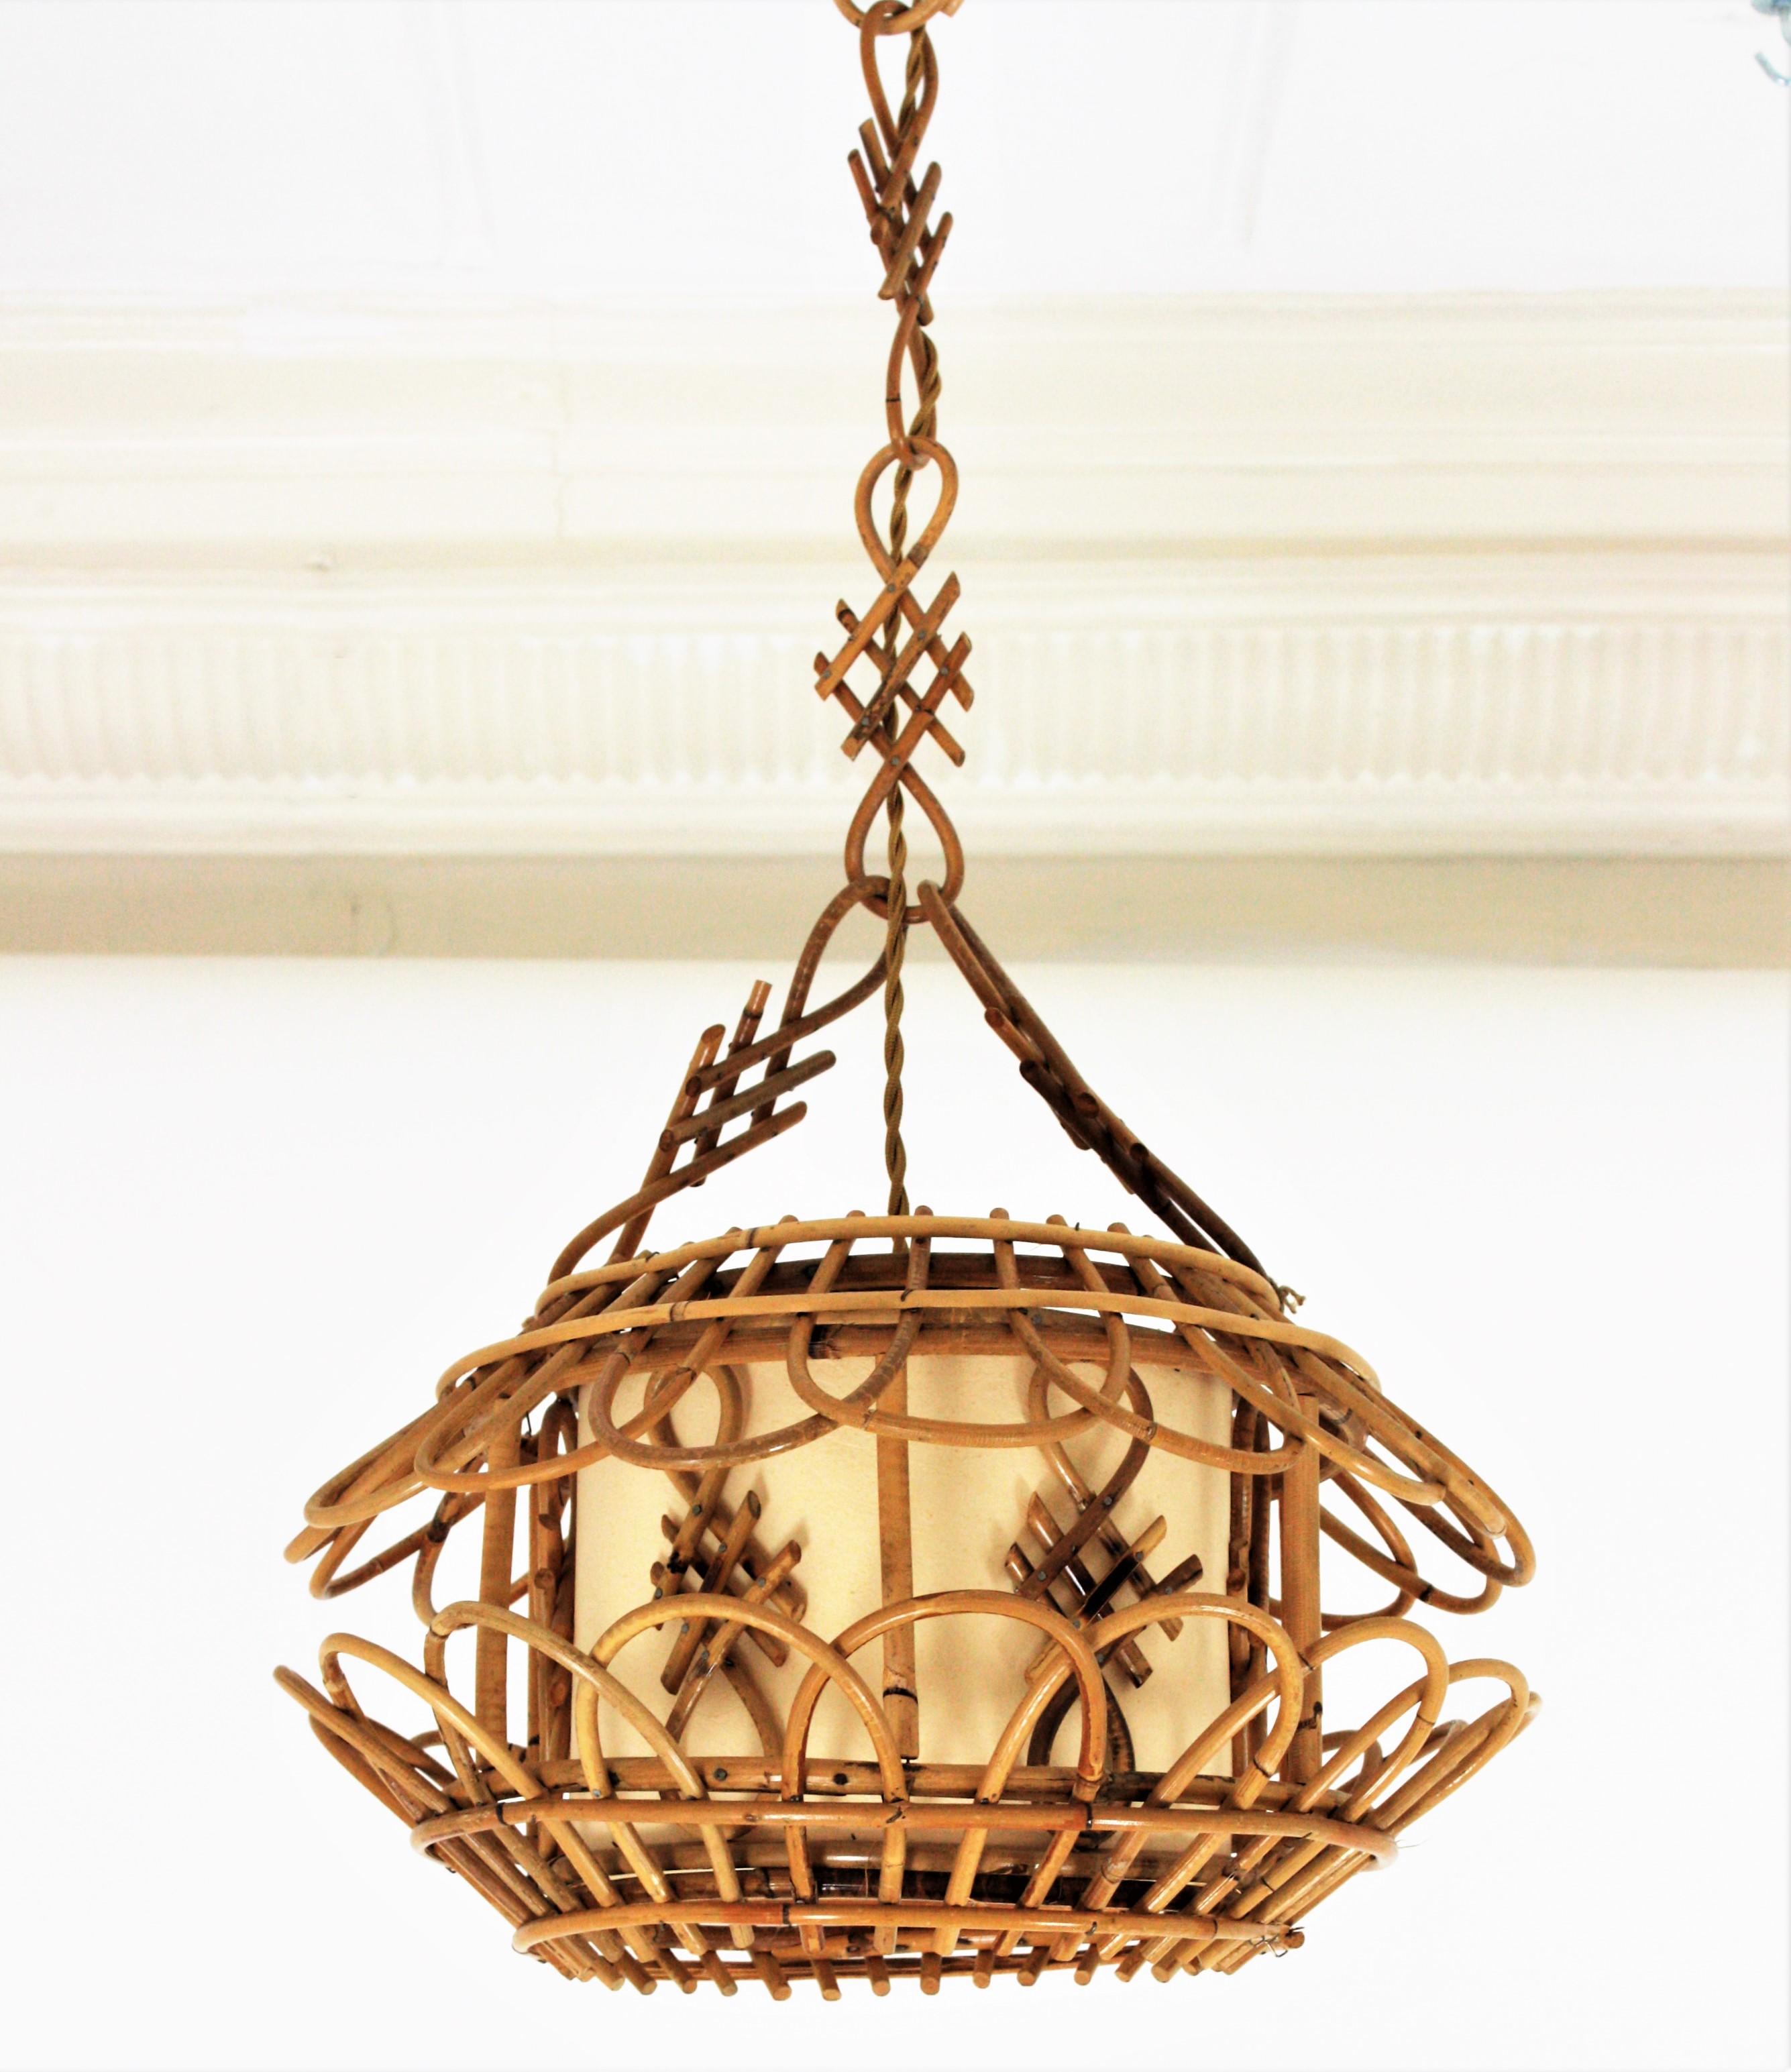 Hand-Crafted French Modernist Rattan Pagoda Pendant Lamp or Lantern with Chinoiserie Accents